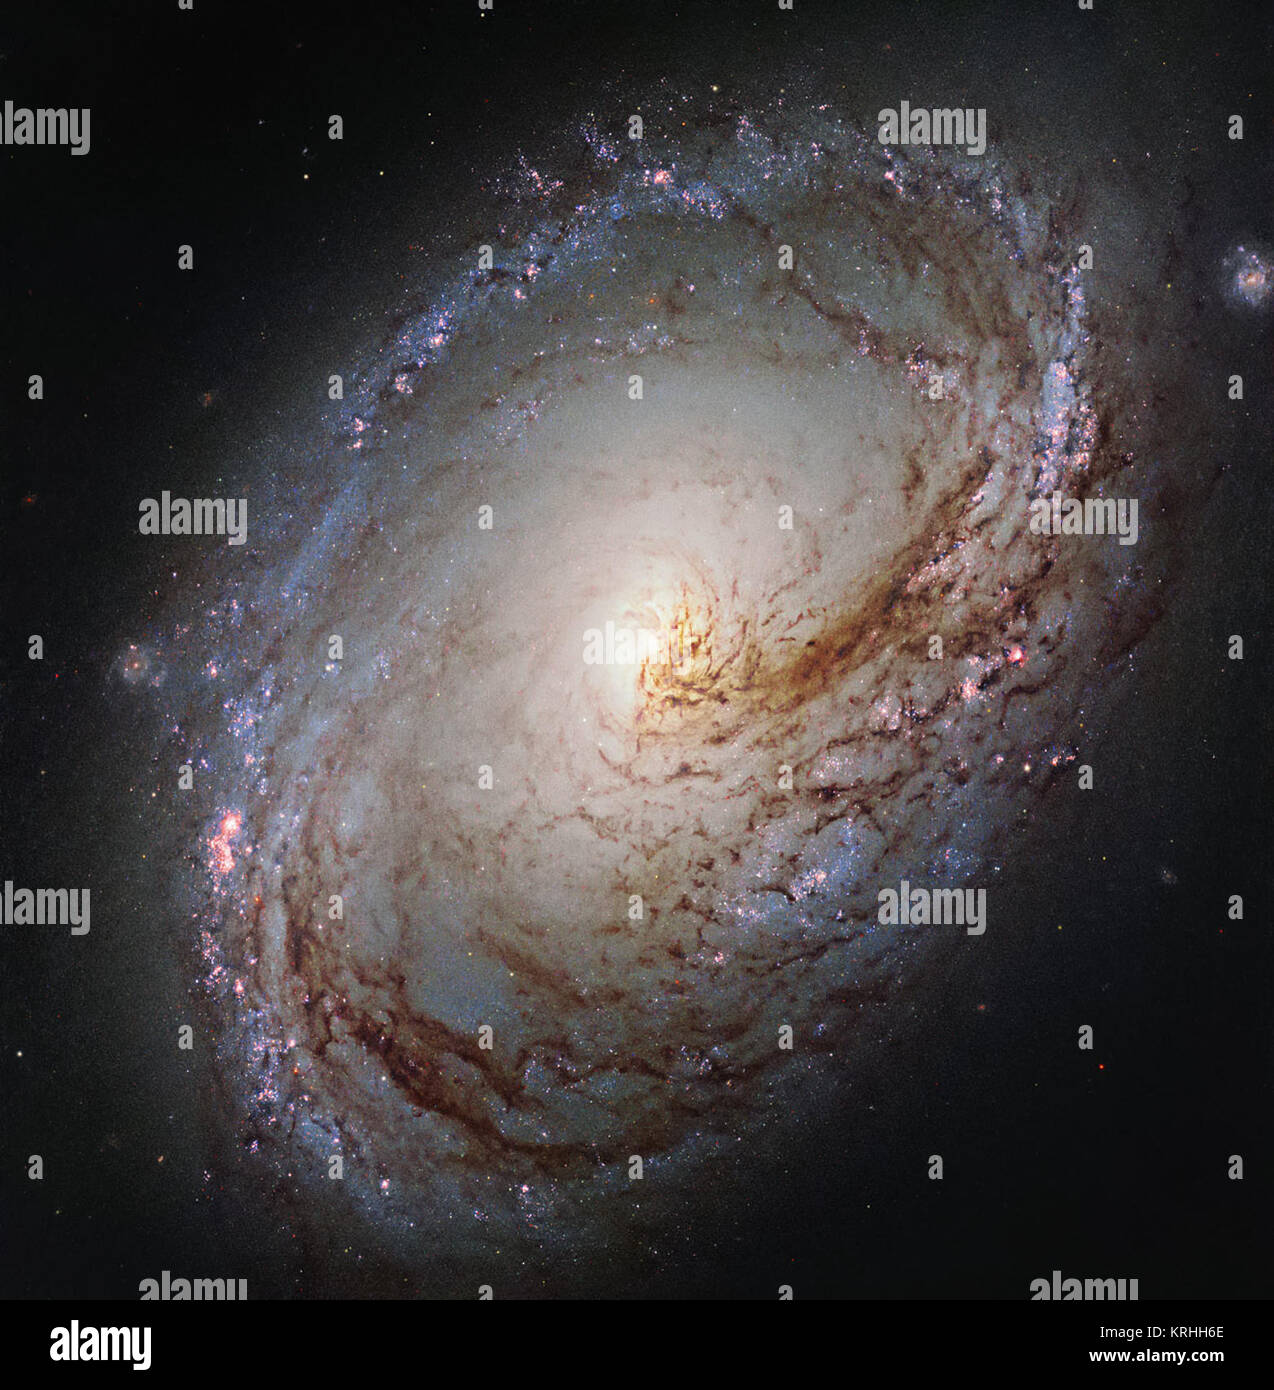 This new NASA/ESA Hubble Space Telescope shows Messier 96, a spiral galaxy just over 35 million light-years away in the constellation of Leo (The Lion). It is of about the same mass and size as the Milky Way. It was first discovered by astronomer Pierre Méchain in 1781, and added to Charles Messier’s famous catalogue of astronomical objects just four days later. The galaxy resembles a giant maelstrom of glowing gas, rippled with dark dust that swirls inwards towards the nucleus. Messier 96 is a very asymmetric galaxy; its dust and gas is unevenly spread throughout its weak spiral arms, and its Stock Photo